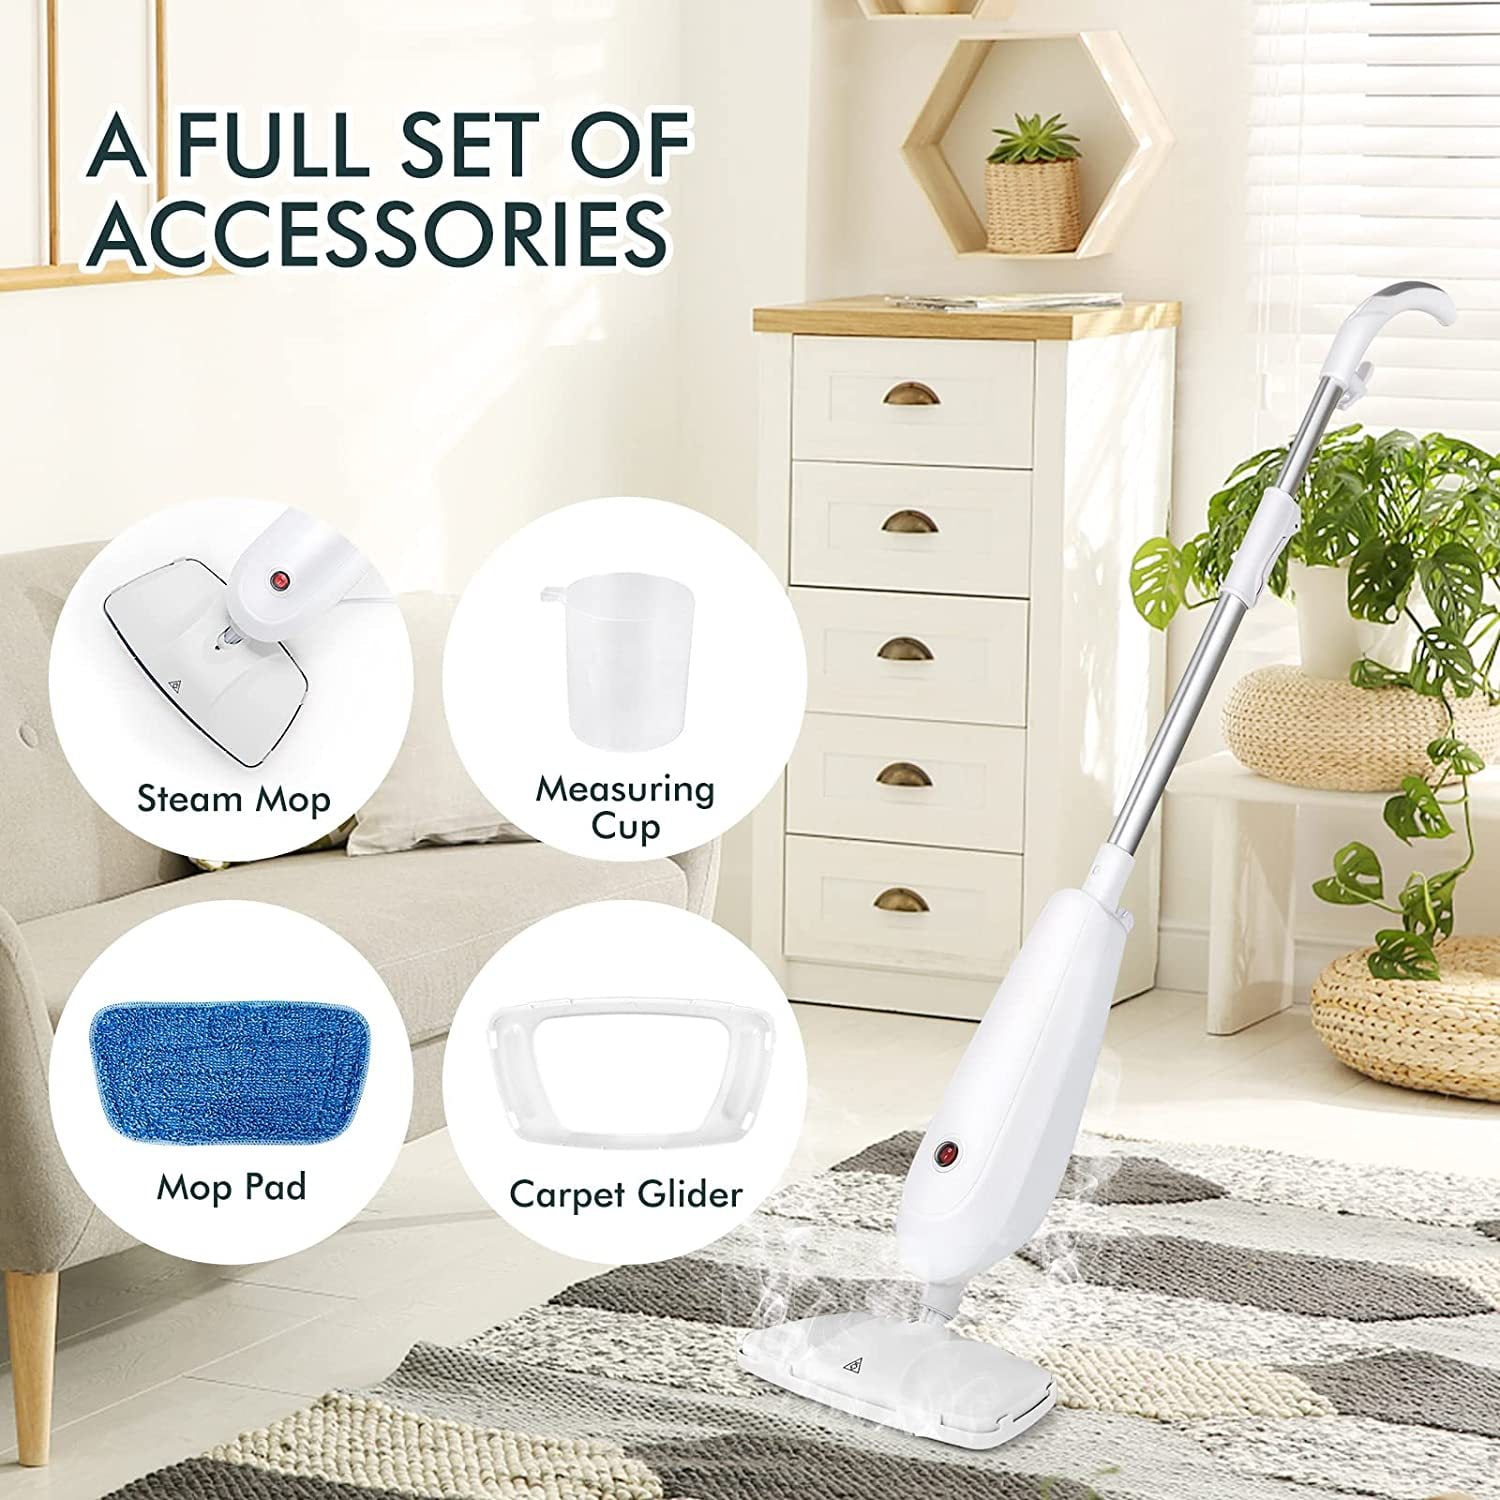  PurSteam Steam Mop, Hard Wood Floor Cleaner, Carpet Cleaner,  Swivel Mop Head, 2 Washable Mop Pads, Turquoise/White